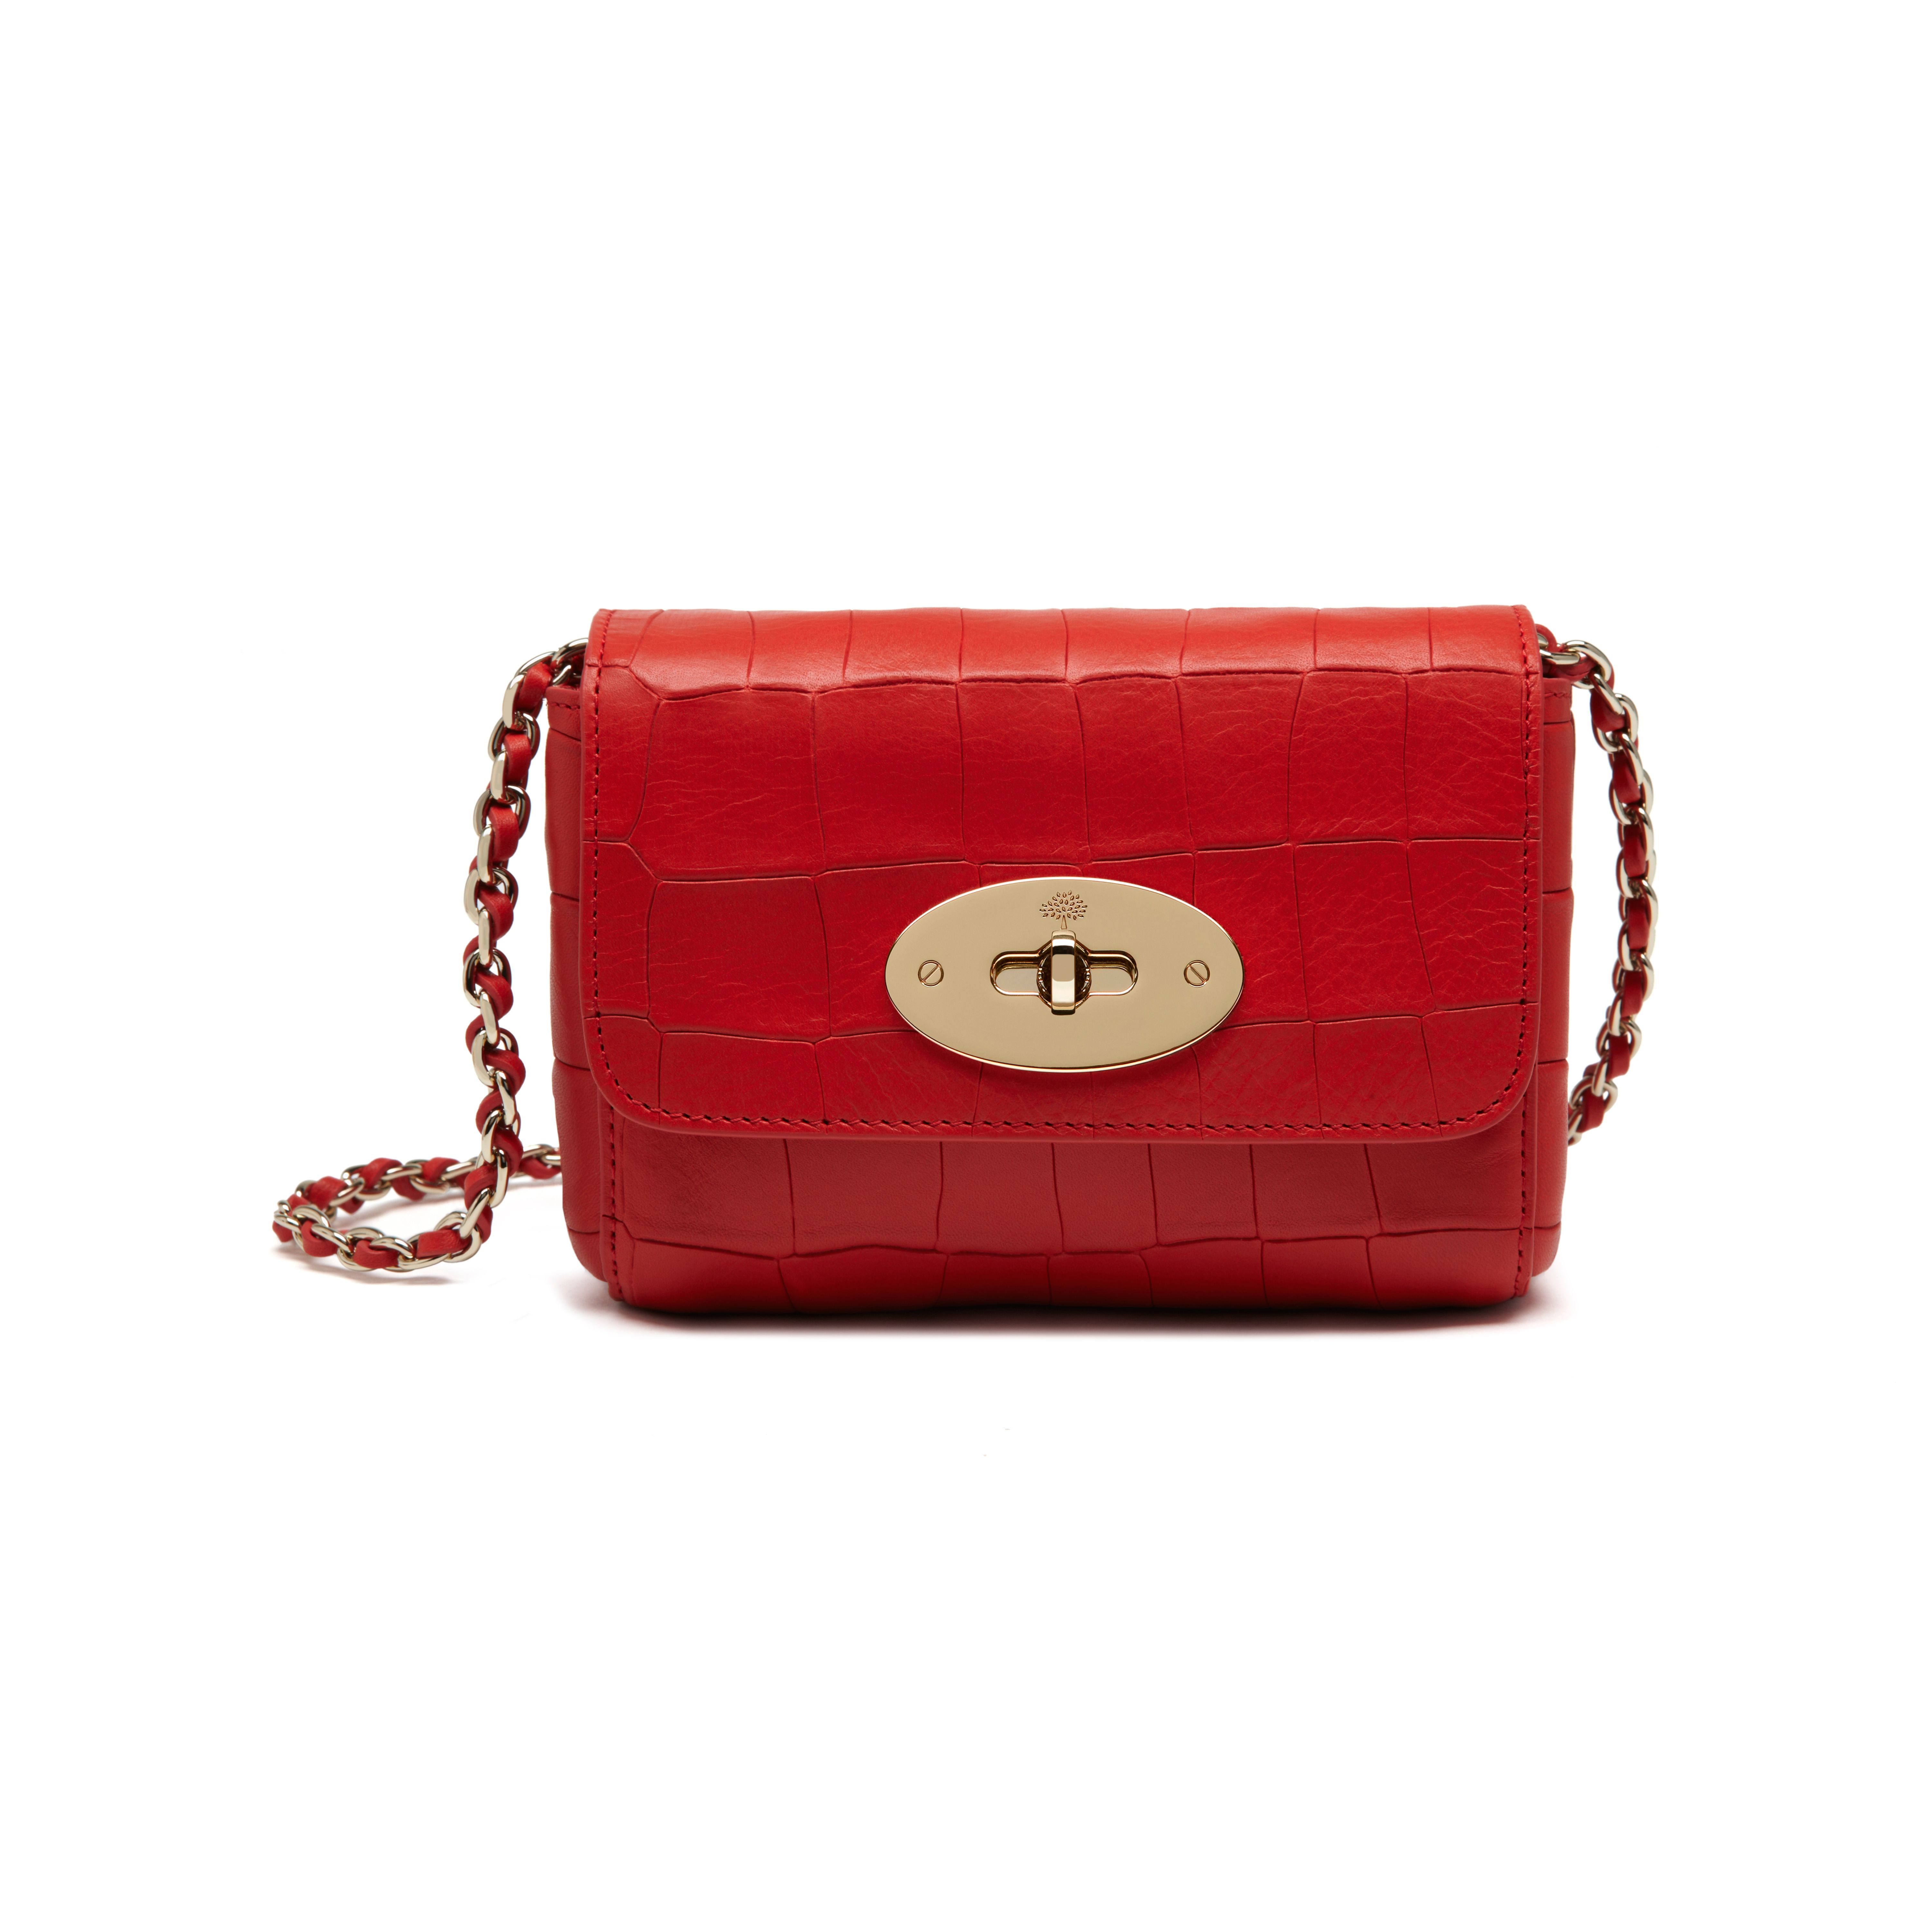 Mulberry Mini Lily Leather Bag in Red - Lyst